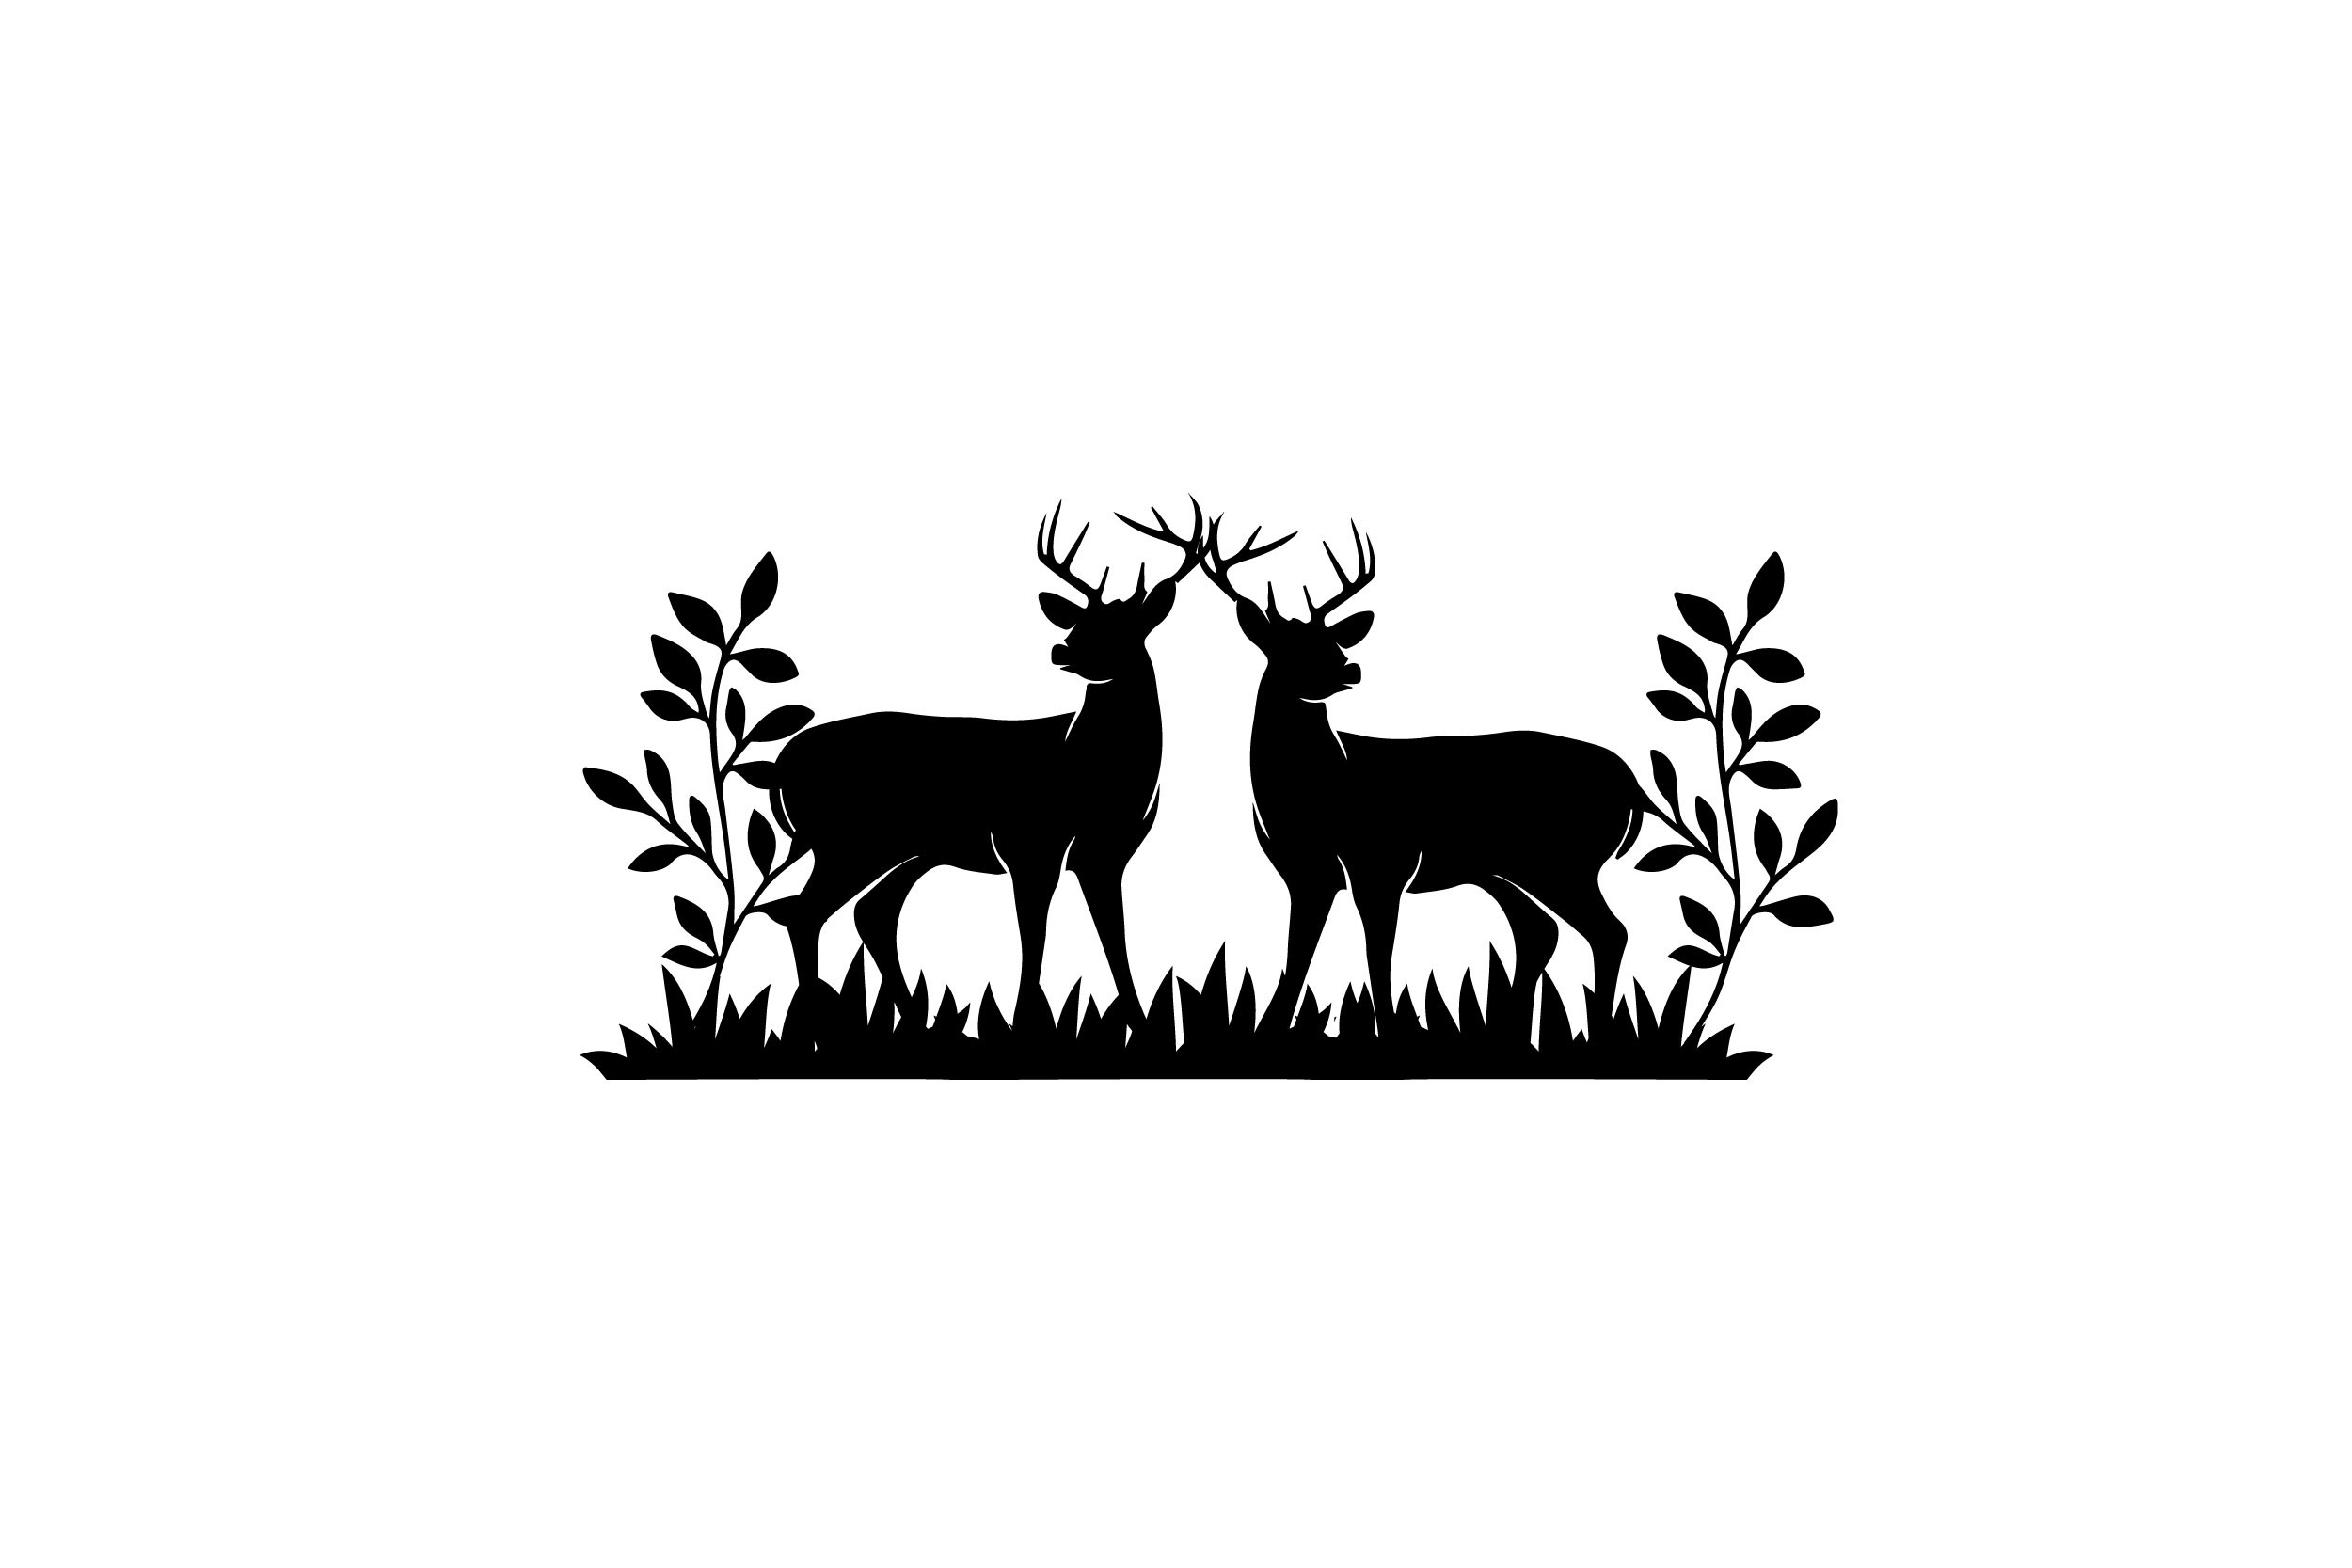 Small Garden Deer with Grass Silhouette Graphic by st · Creative Fabrica